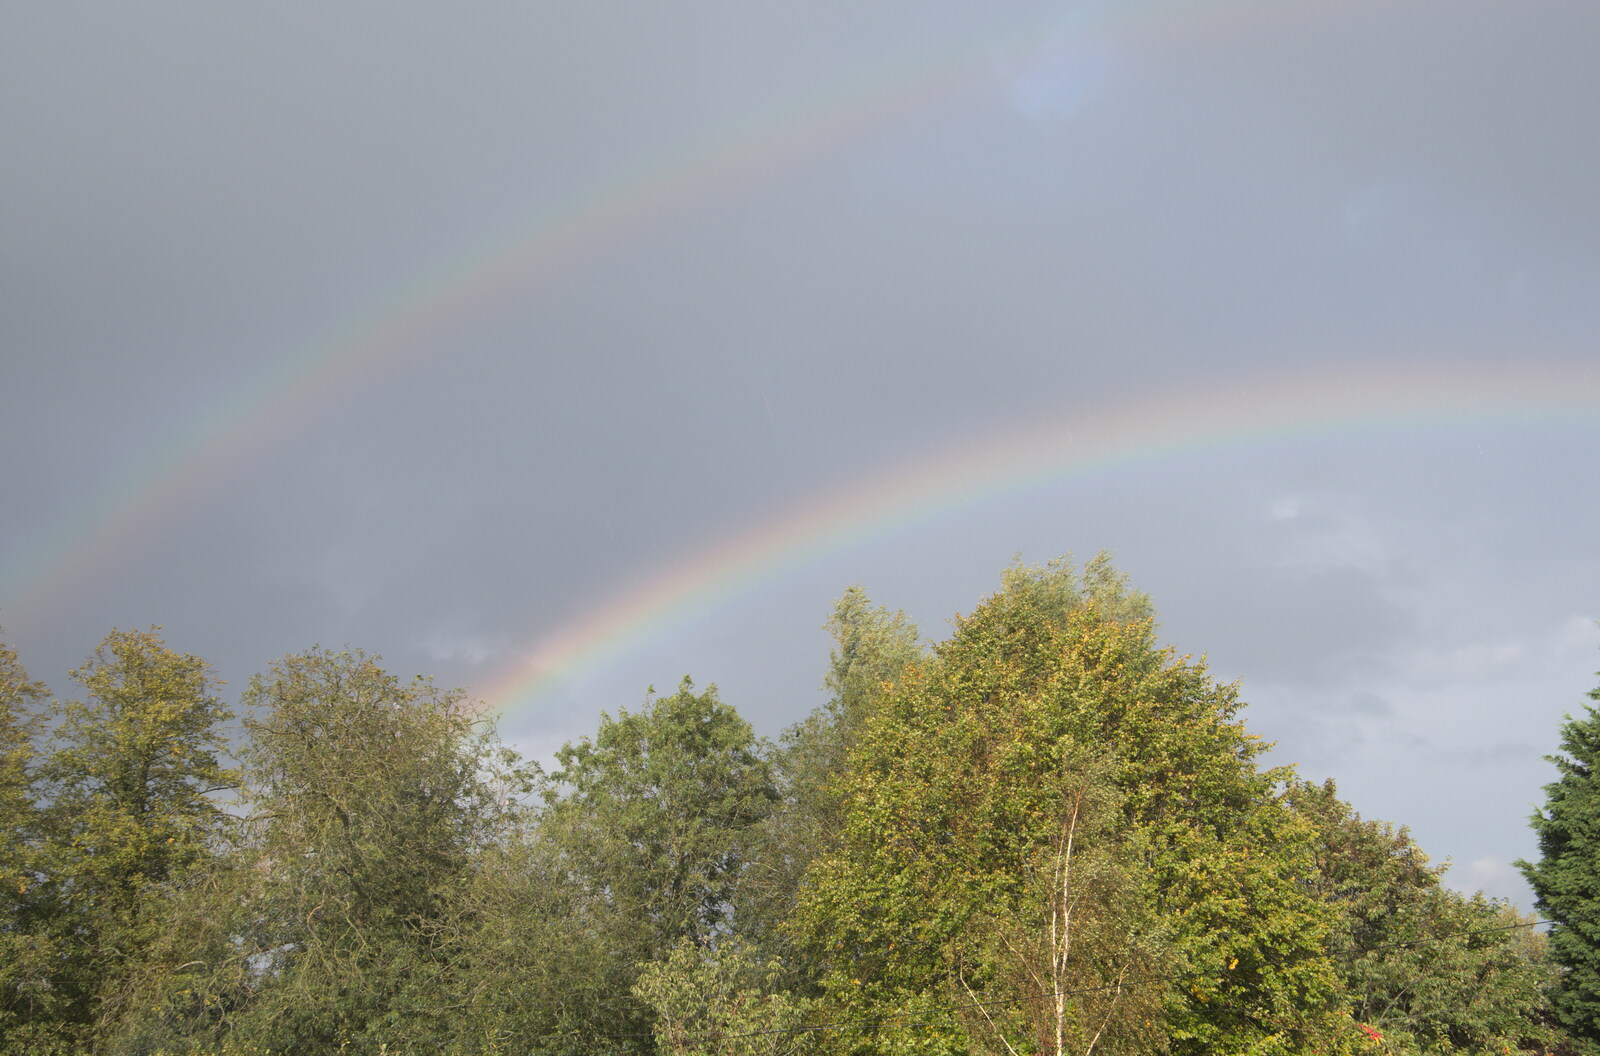 Back home, there's a double rainbow from A Trip to Norwich, Norfolk - 27th September 2020